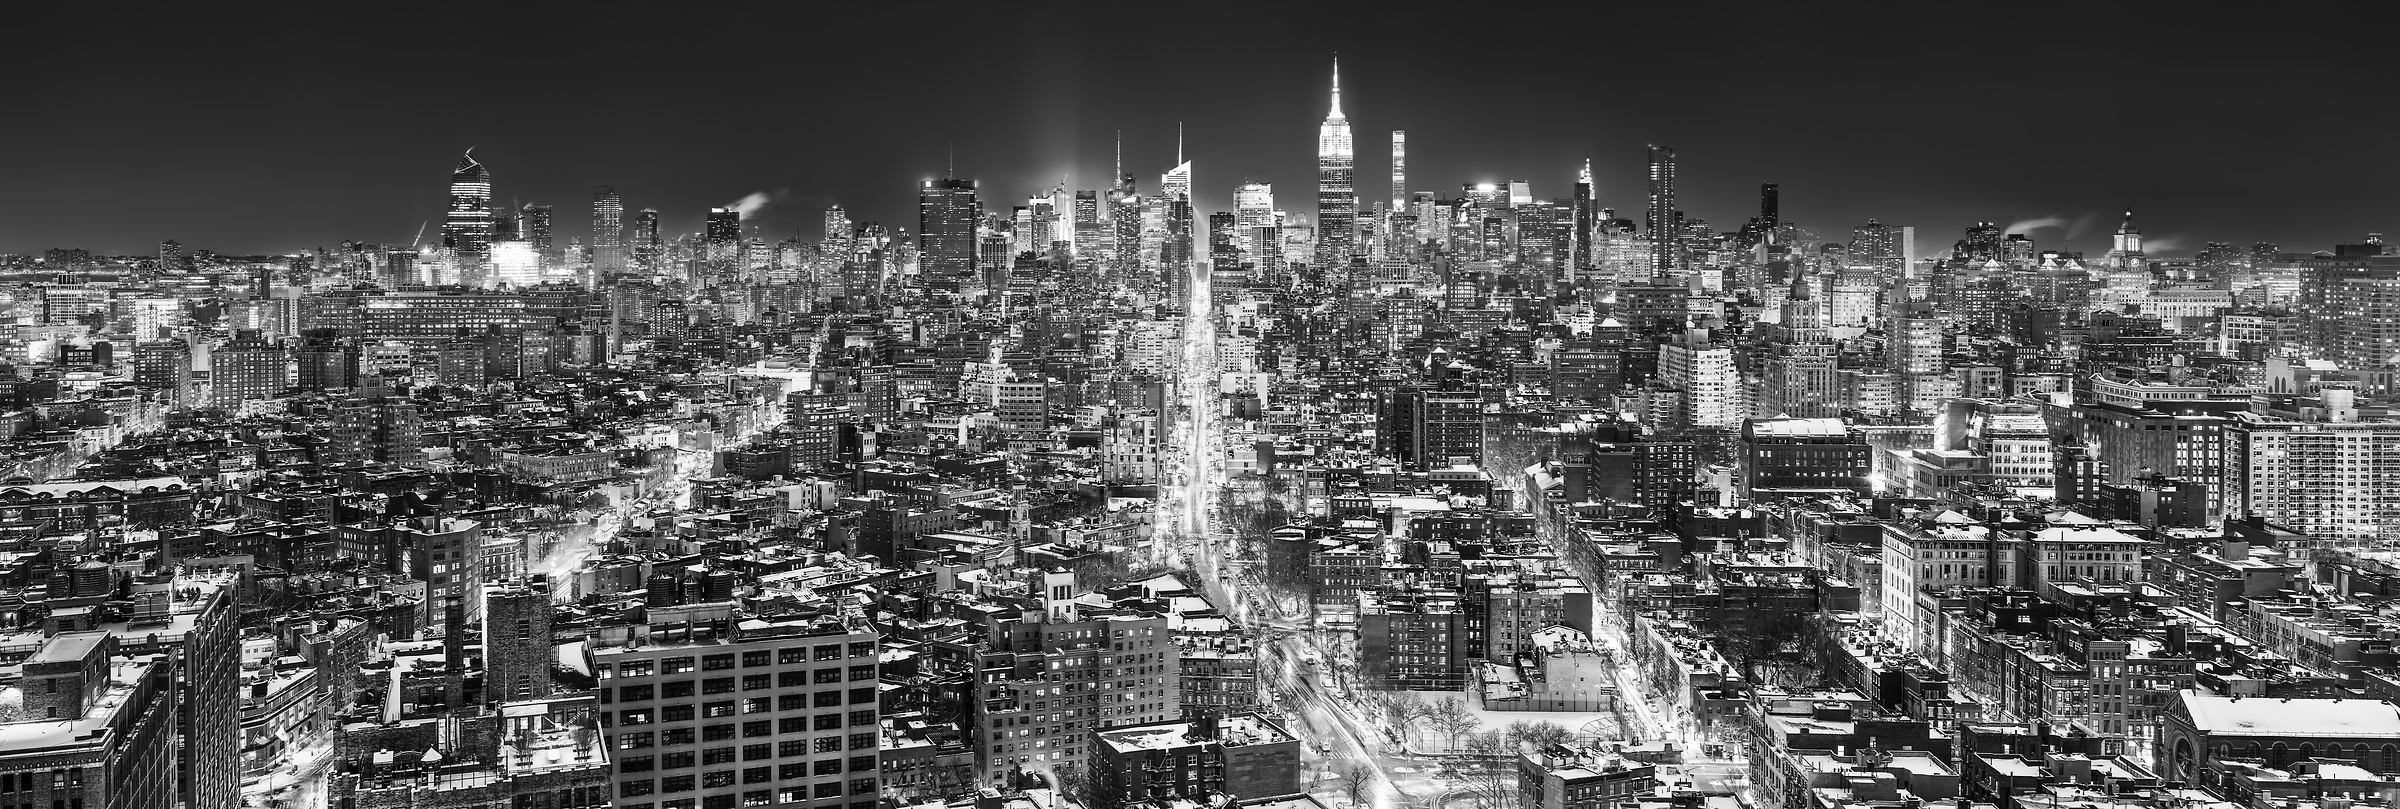 5,910 megapixels! A very high resolution, large-format VAST photo print of the Manhattan NYC skyline in winter snow at night; black and white cityscape fine art photo created by Dan Piech in New York City